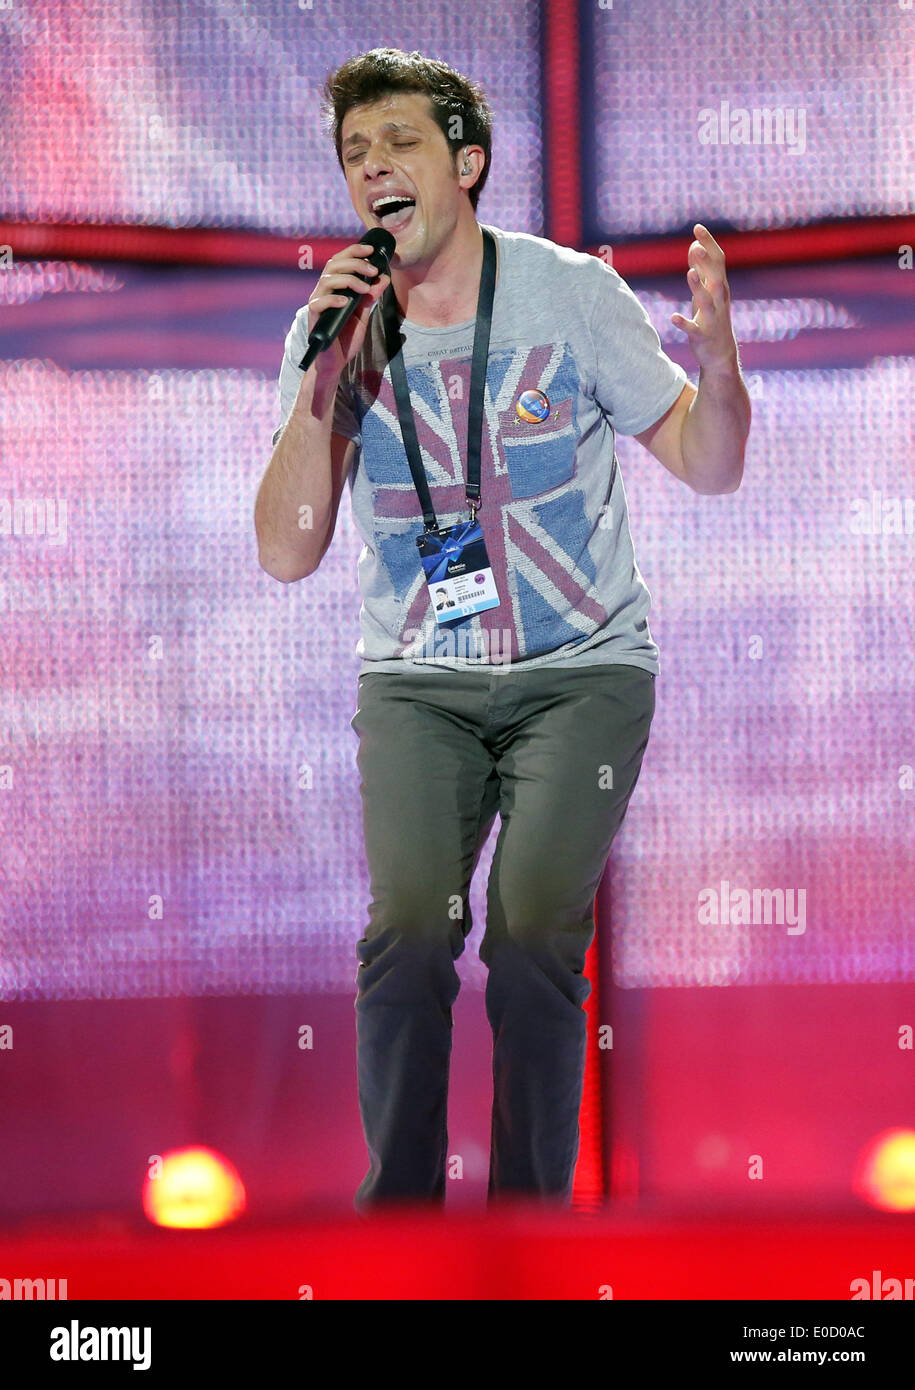 Copenhagen, Denmark. 9th May, 2014. Aram MP3 representing Armenia performs  during the first rehearsal of the grand final for the Eurovision Song  Contest 2014 in Copenhagen, Denmark, 9 May 2014. The grand